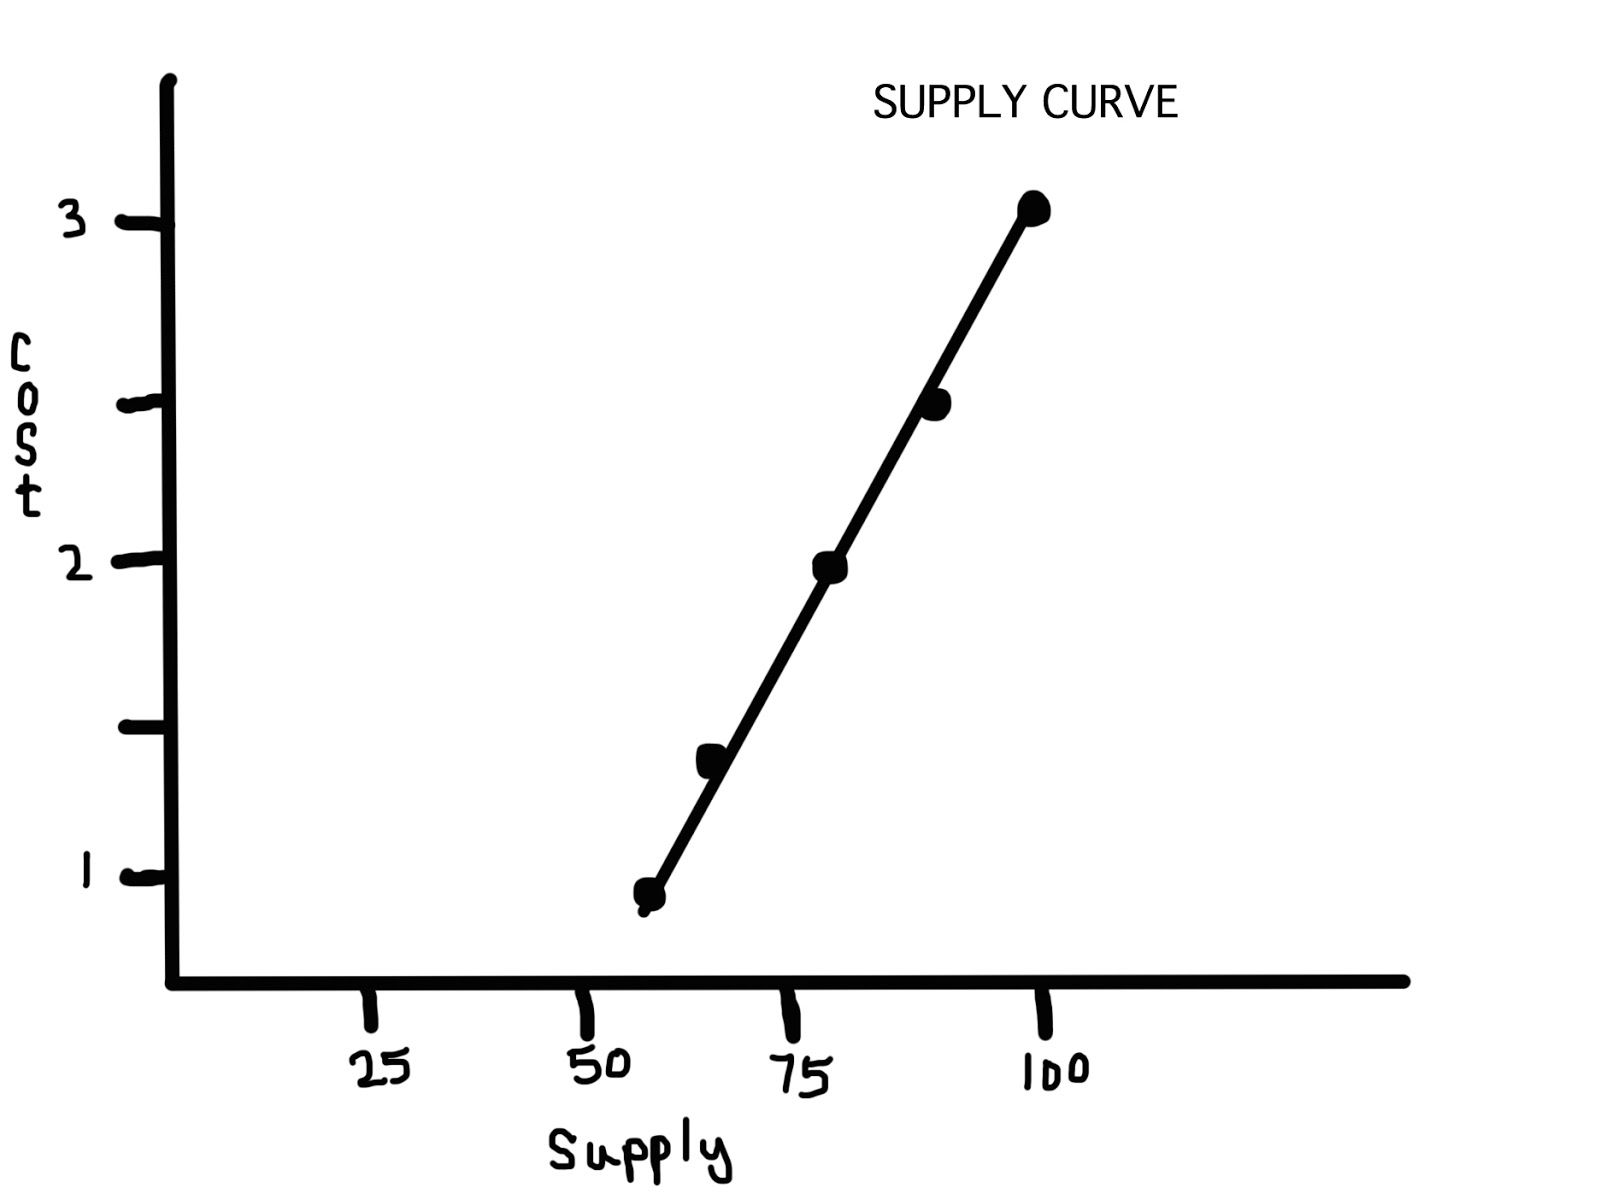 AwesomeEcon SUPPLY CURVE BLOG